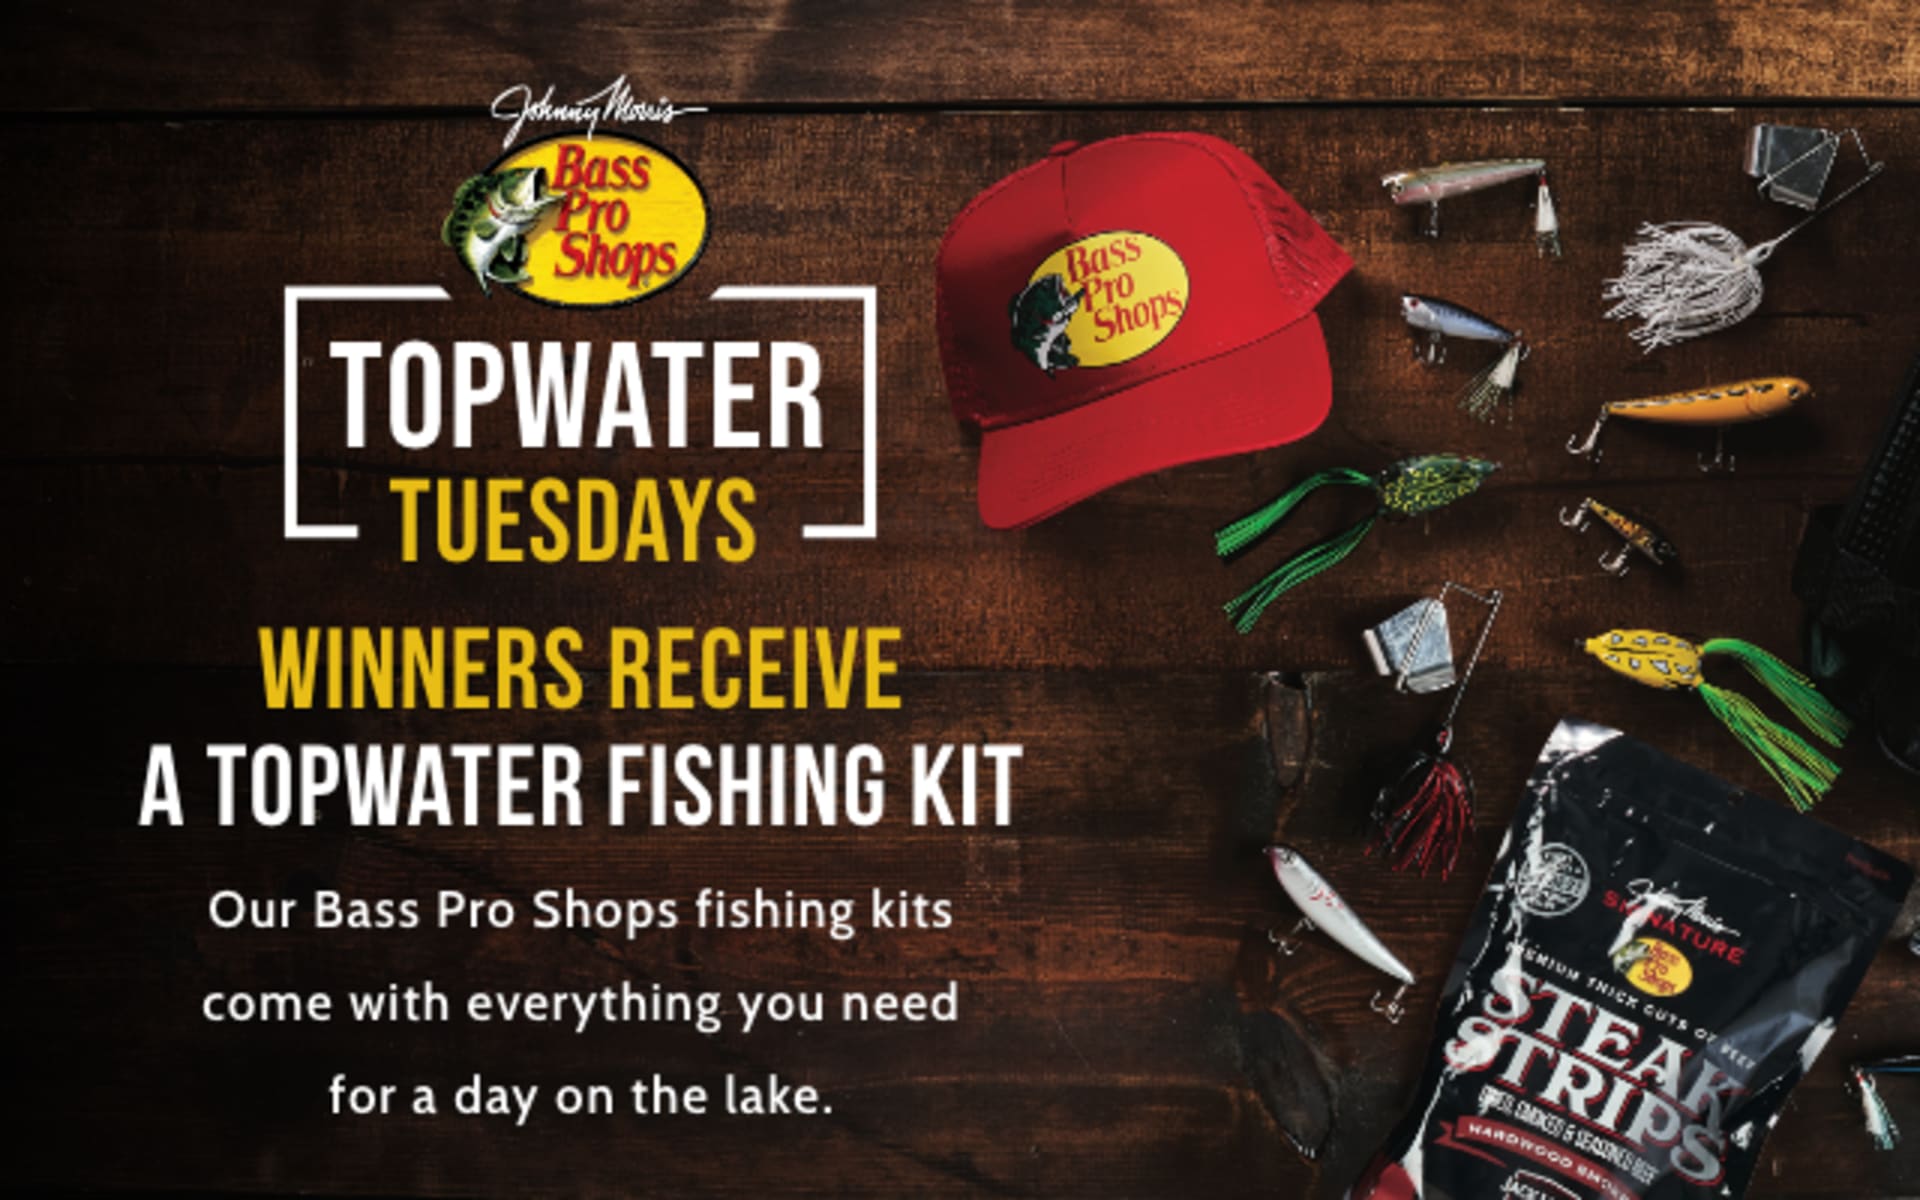 Bass Pro Shops Getting Exclusive Record From Country Megastar, Won't Be  Available Digitally